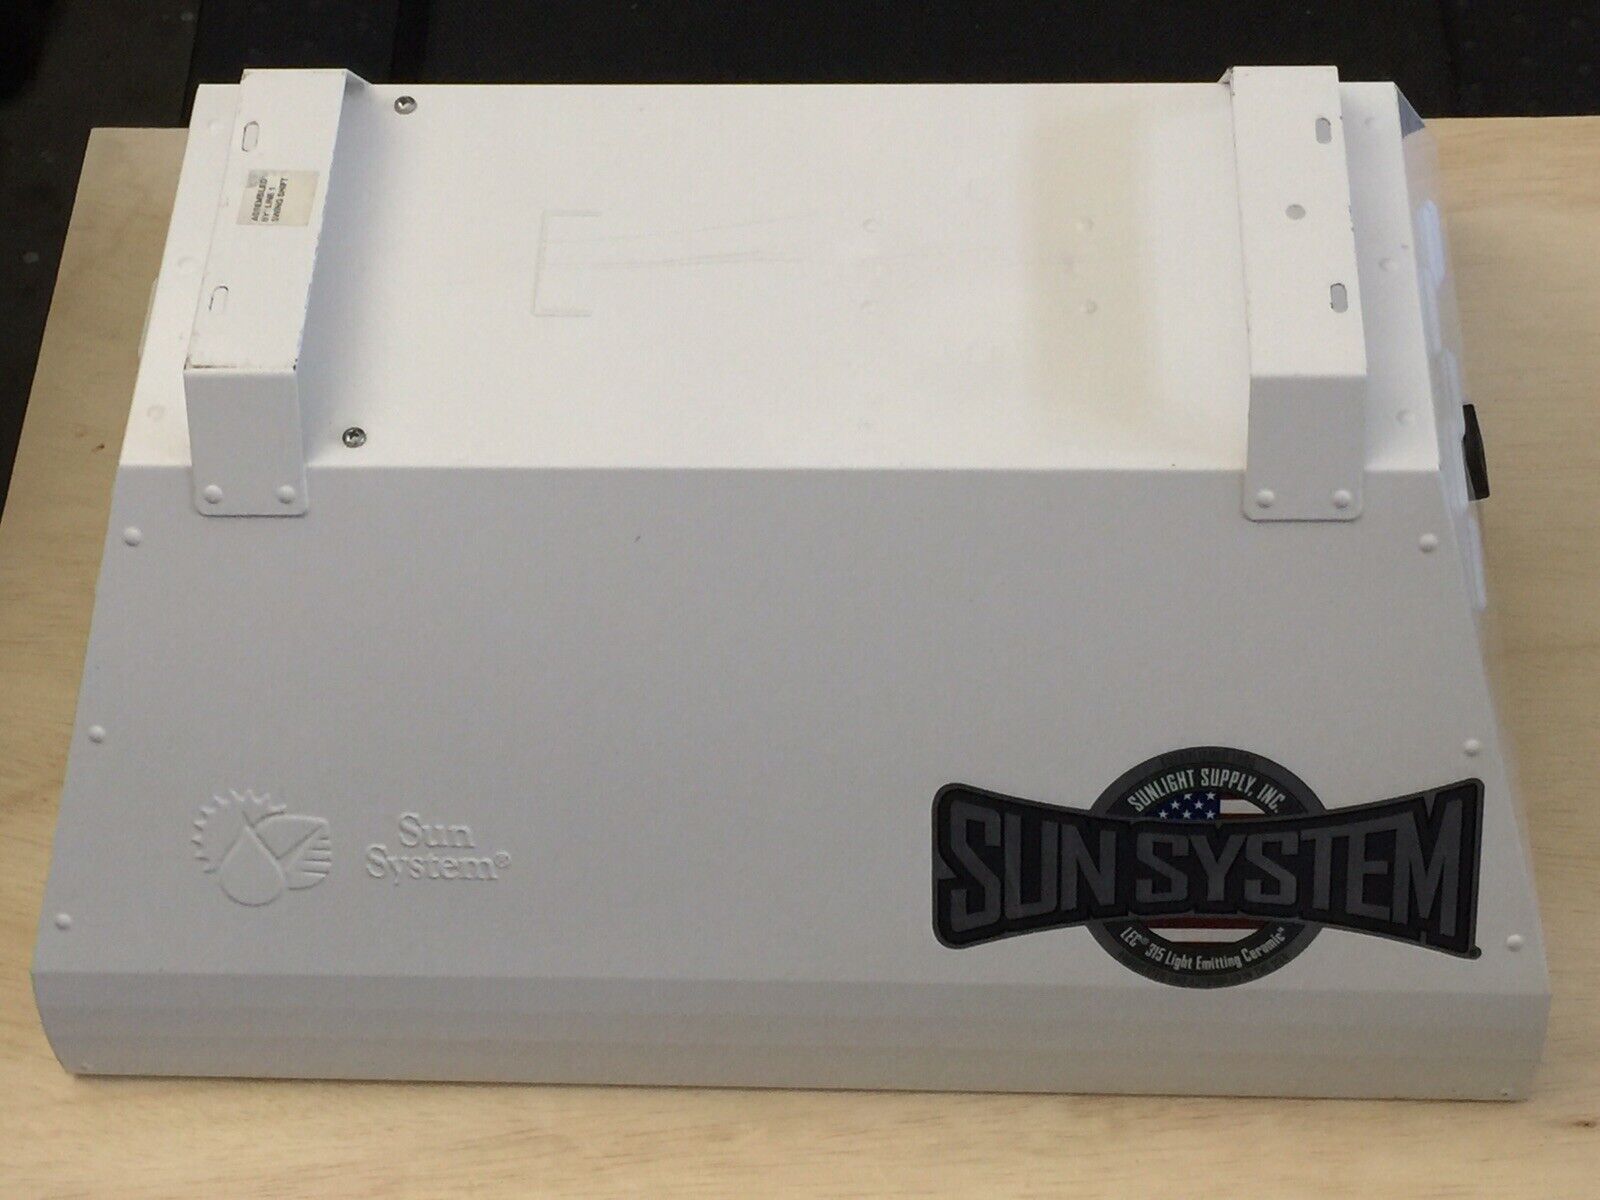 Sun System LEC 315 - 120 Volt w/ 3100 K Lamp - Very Good Condition